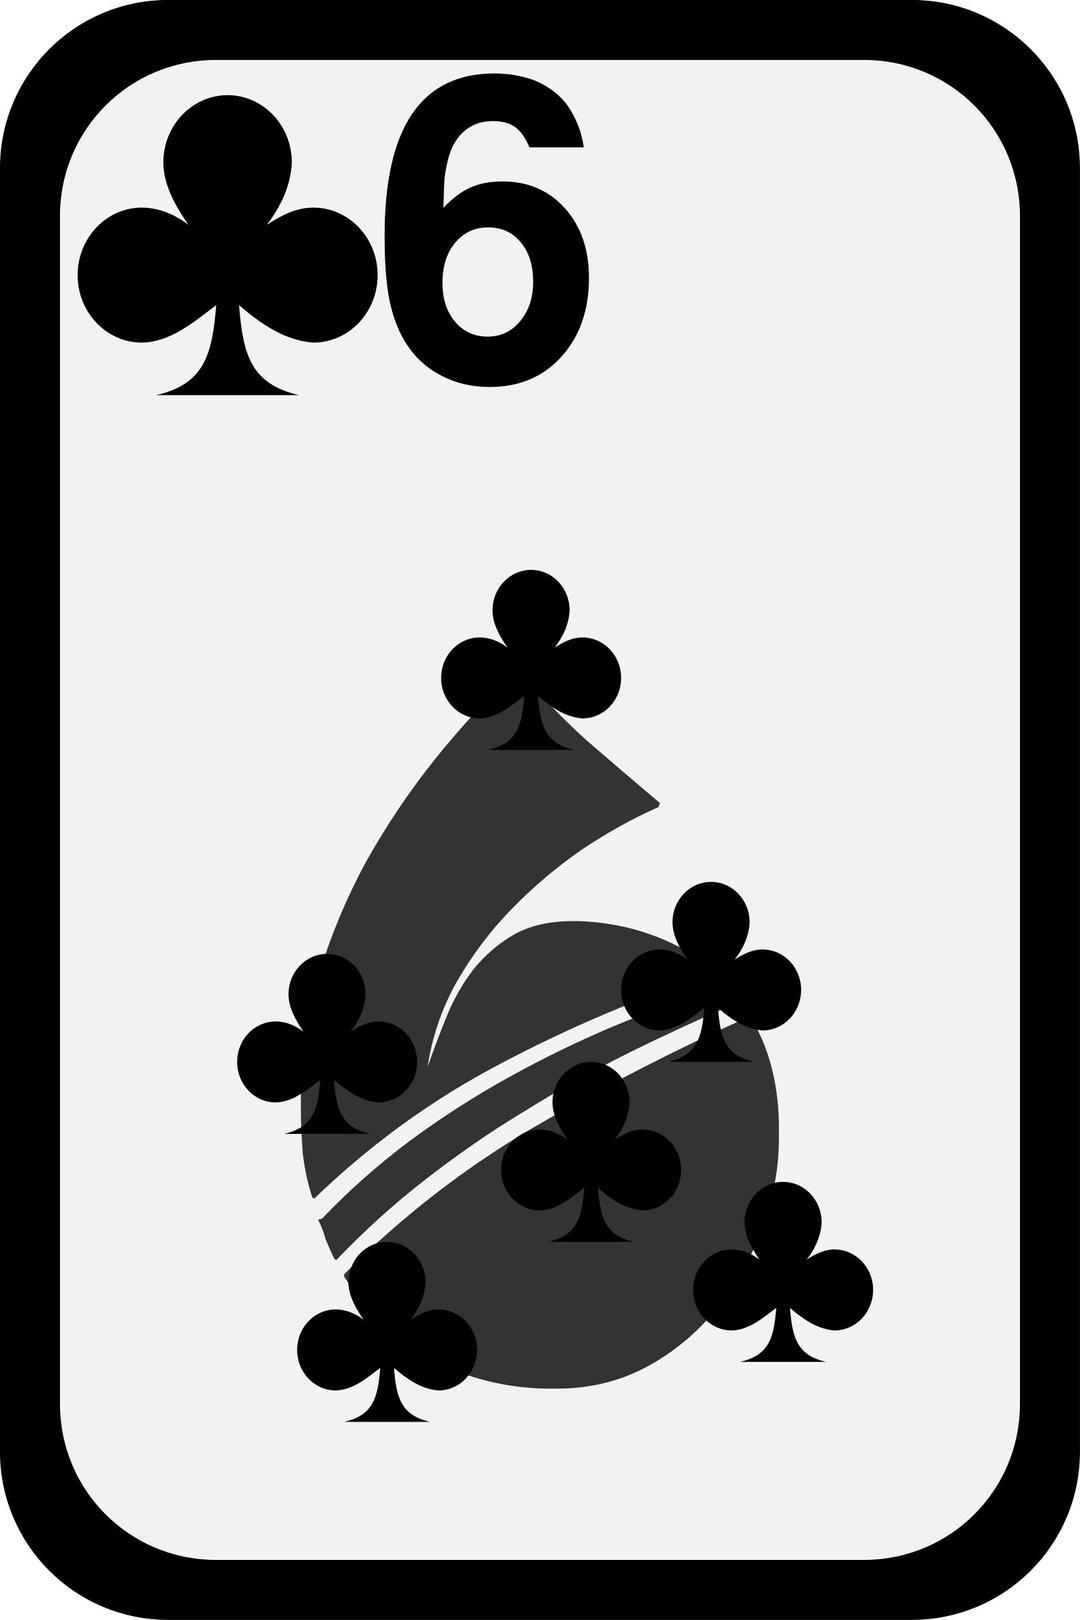 Six of Clubs png transparent